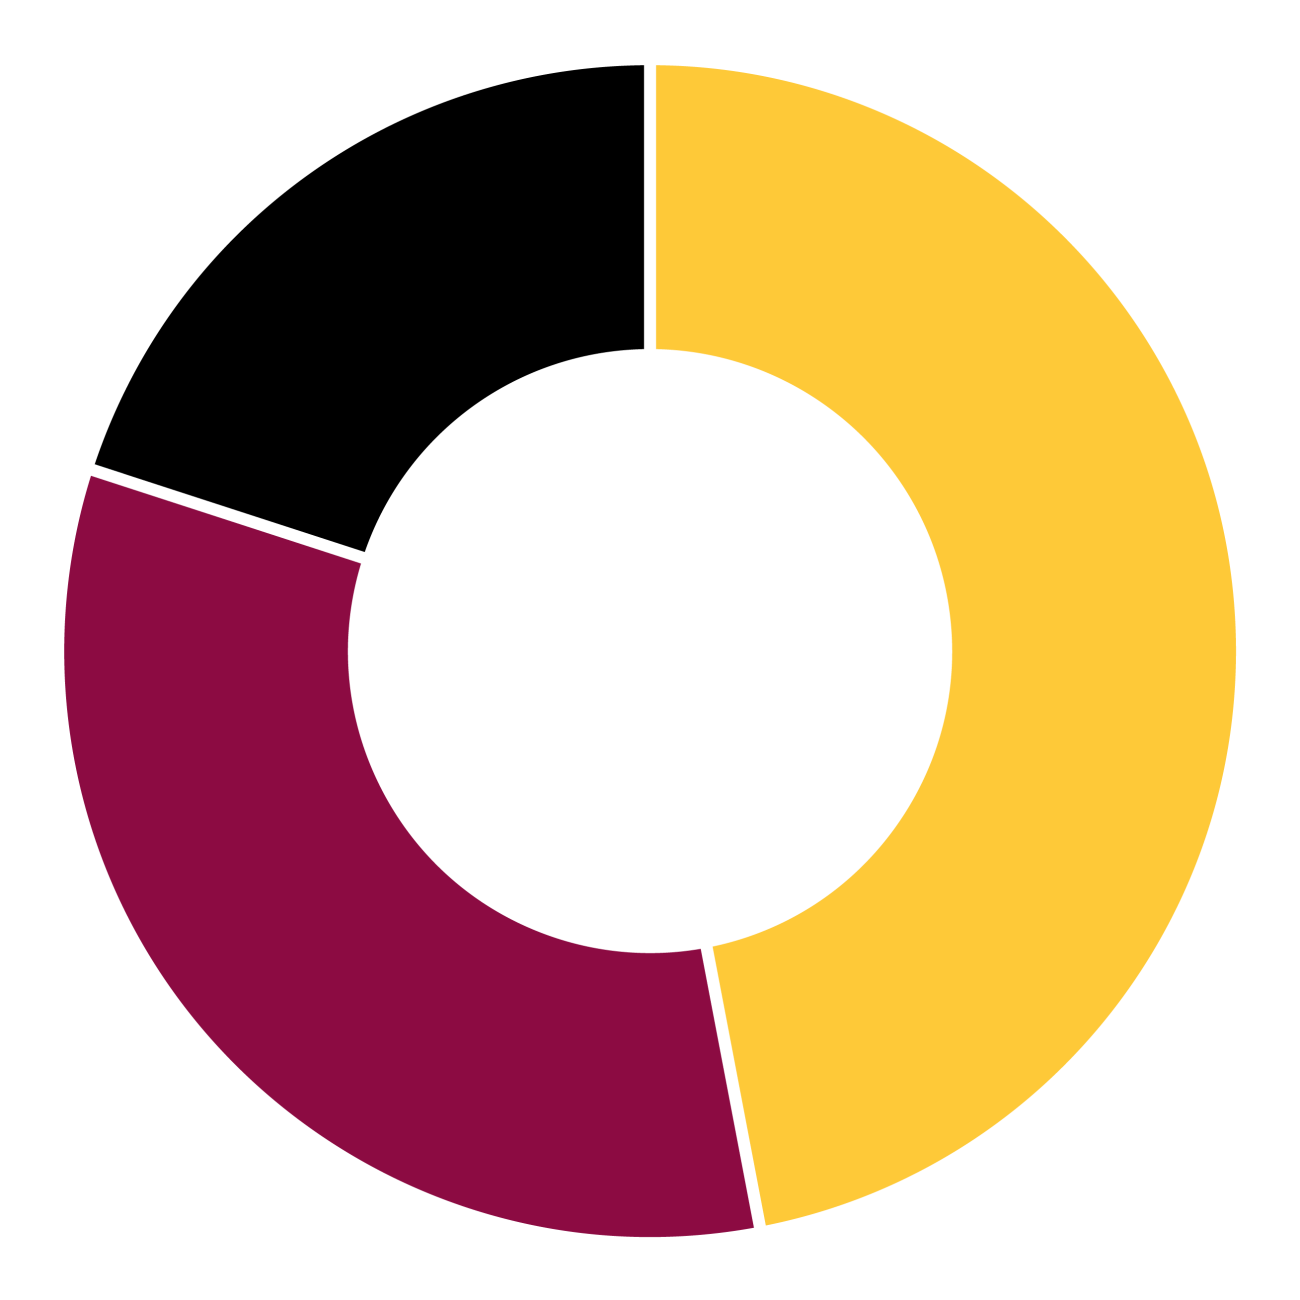 Maroon and gold pie chart showing 47%, 33% and 20%.